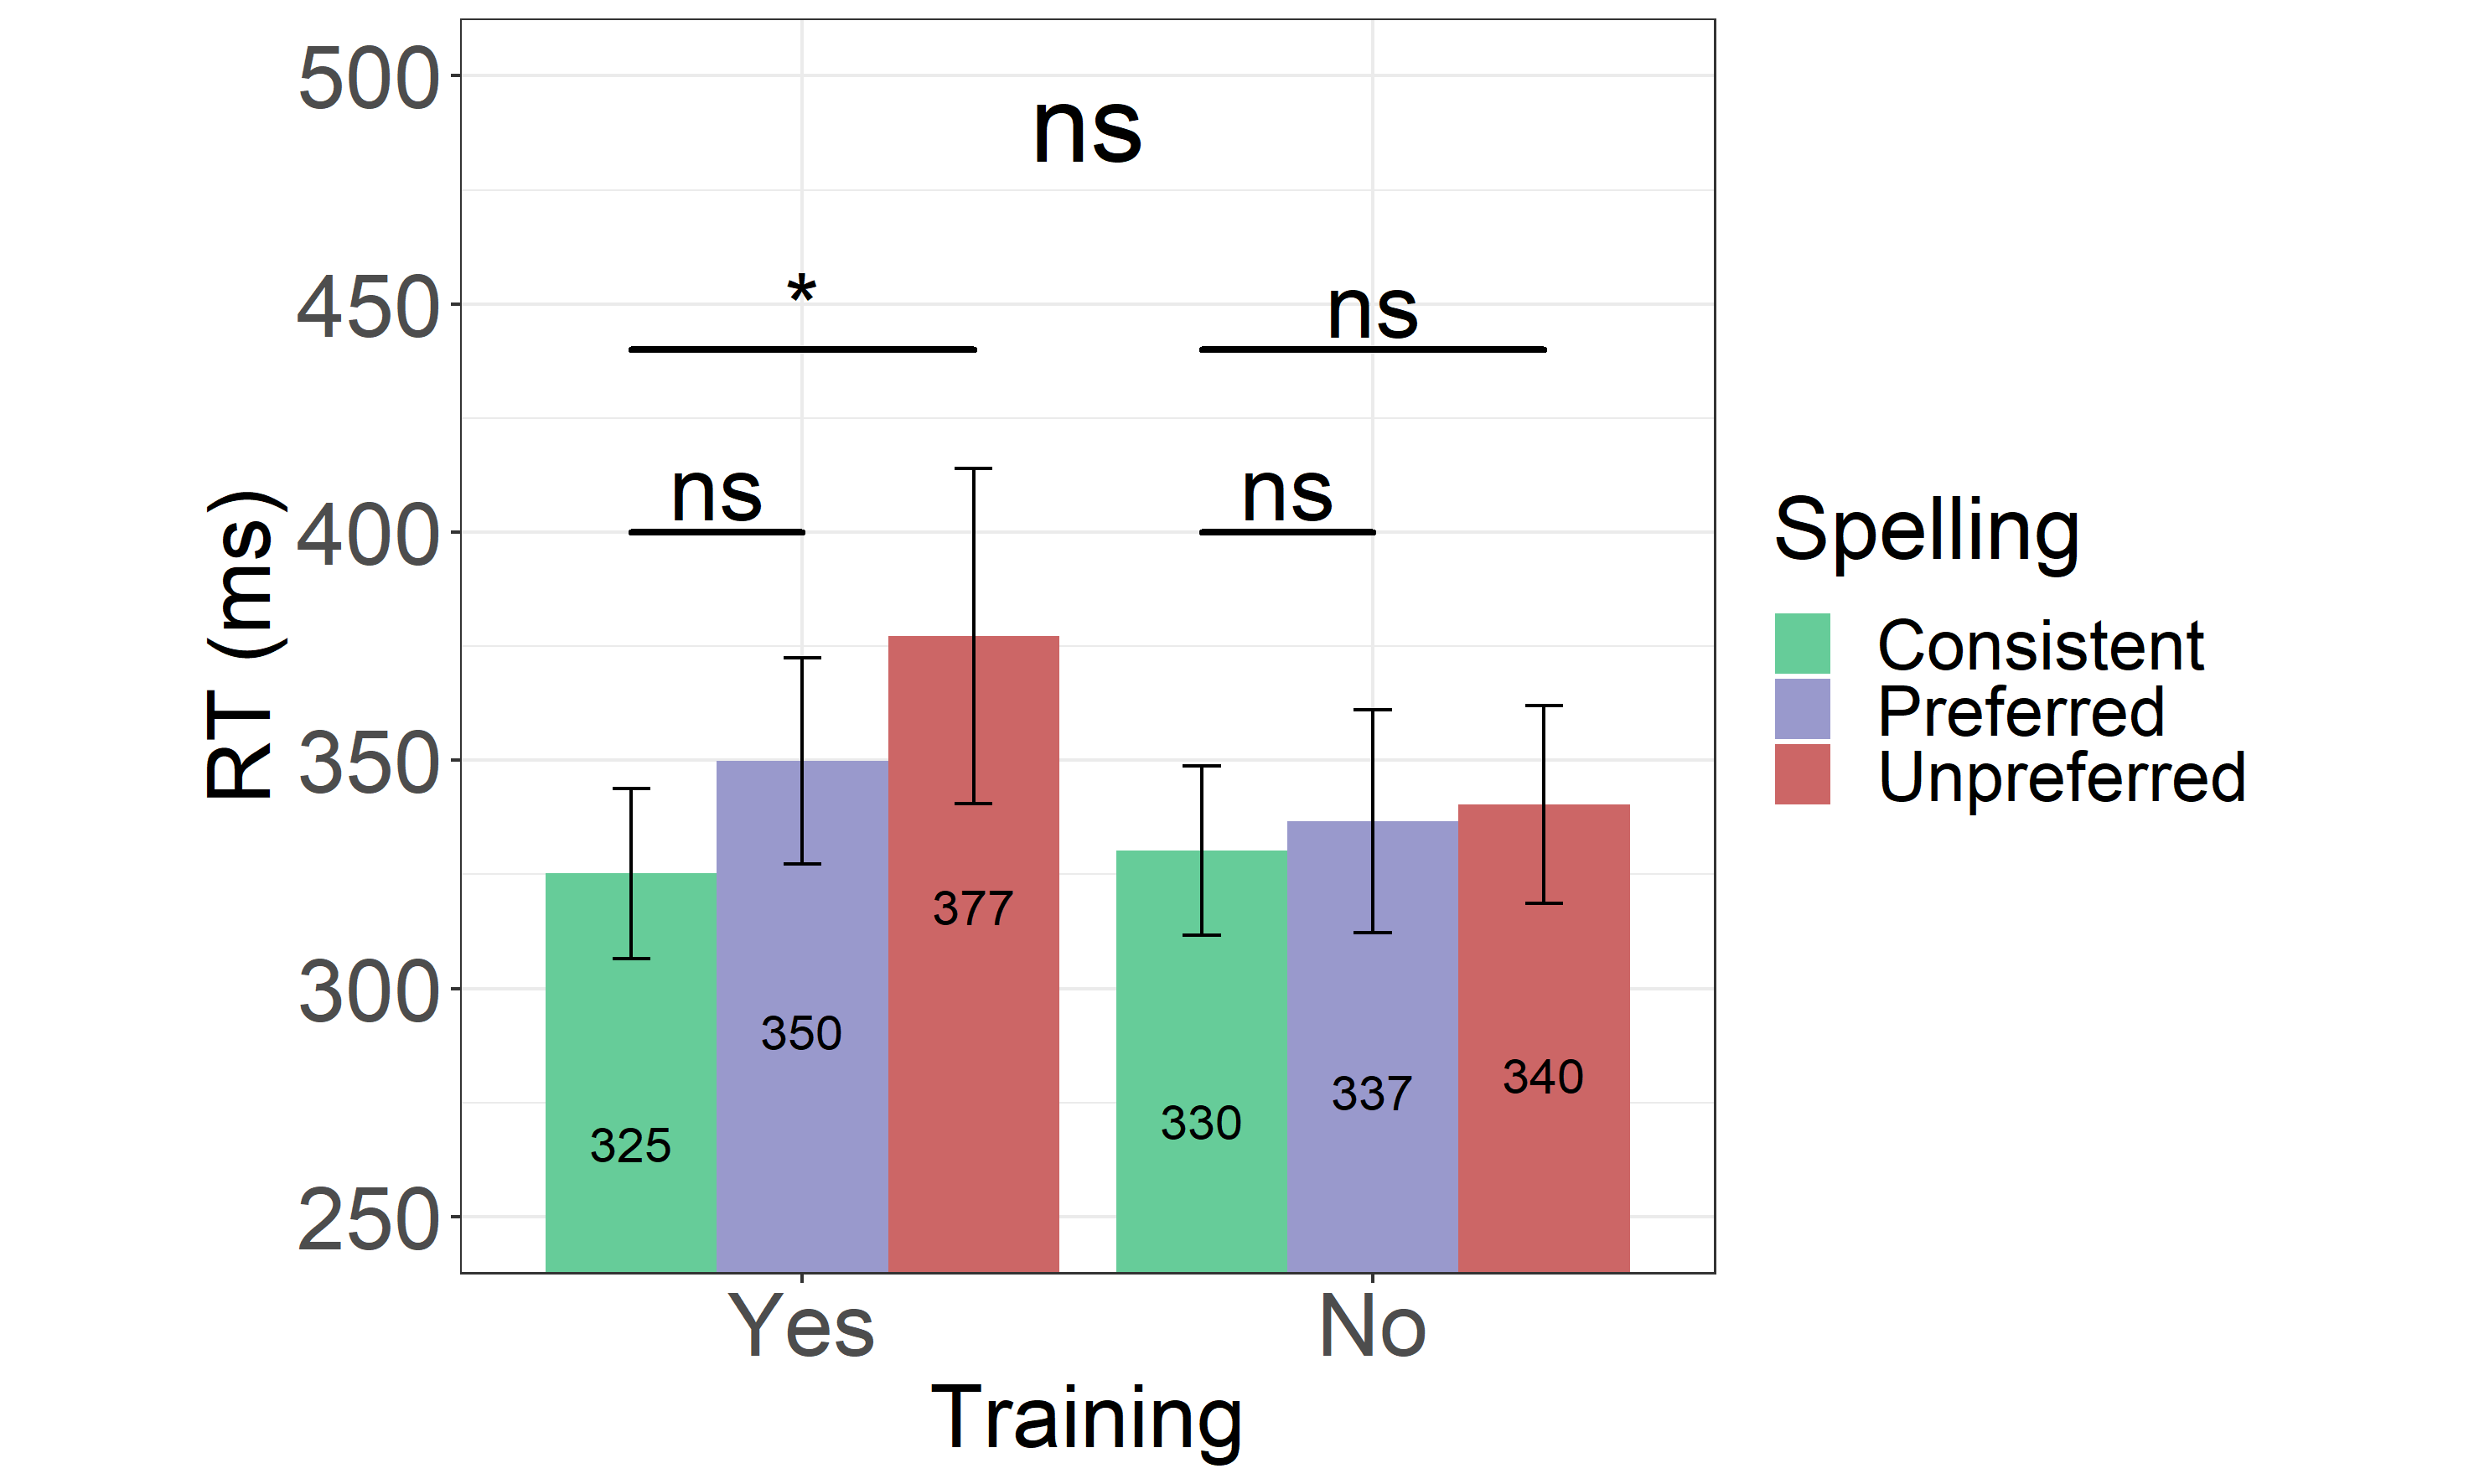 Reaction Times in the Active Learning Group From Experiment 3. Reaction times for both trained (Yes) and untrained (No) consistent, preferred and unpreferred word spellings. Error bars represent the standard error of the mean, and the numbers within the bars represent the mean RTs for each condition.